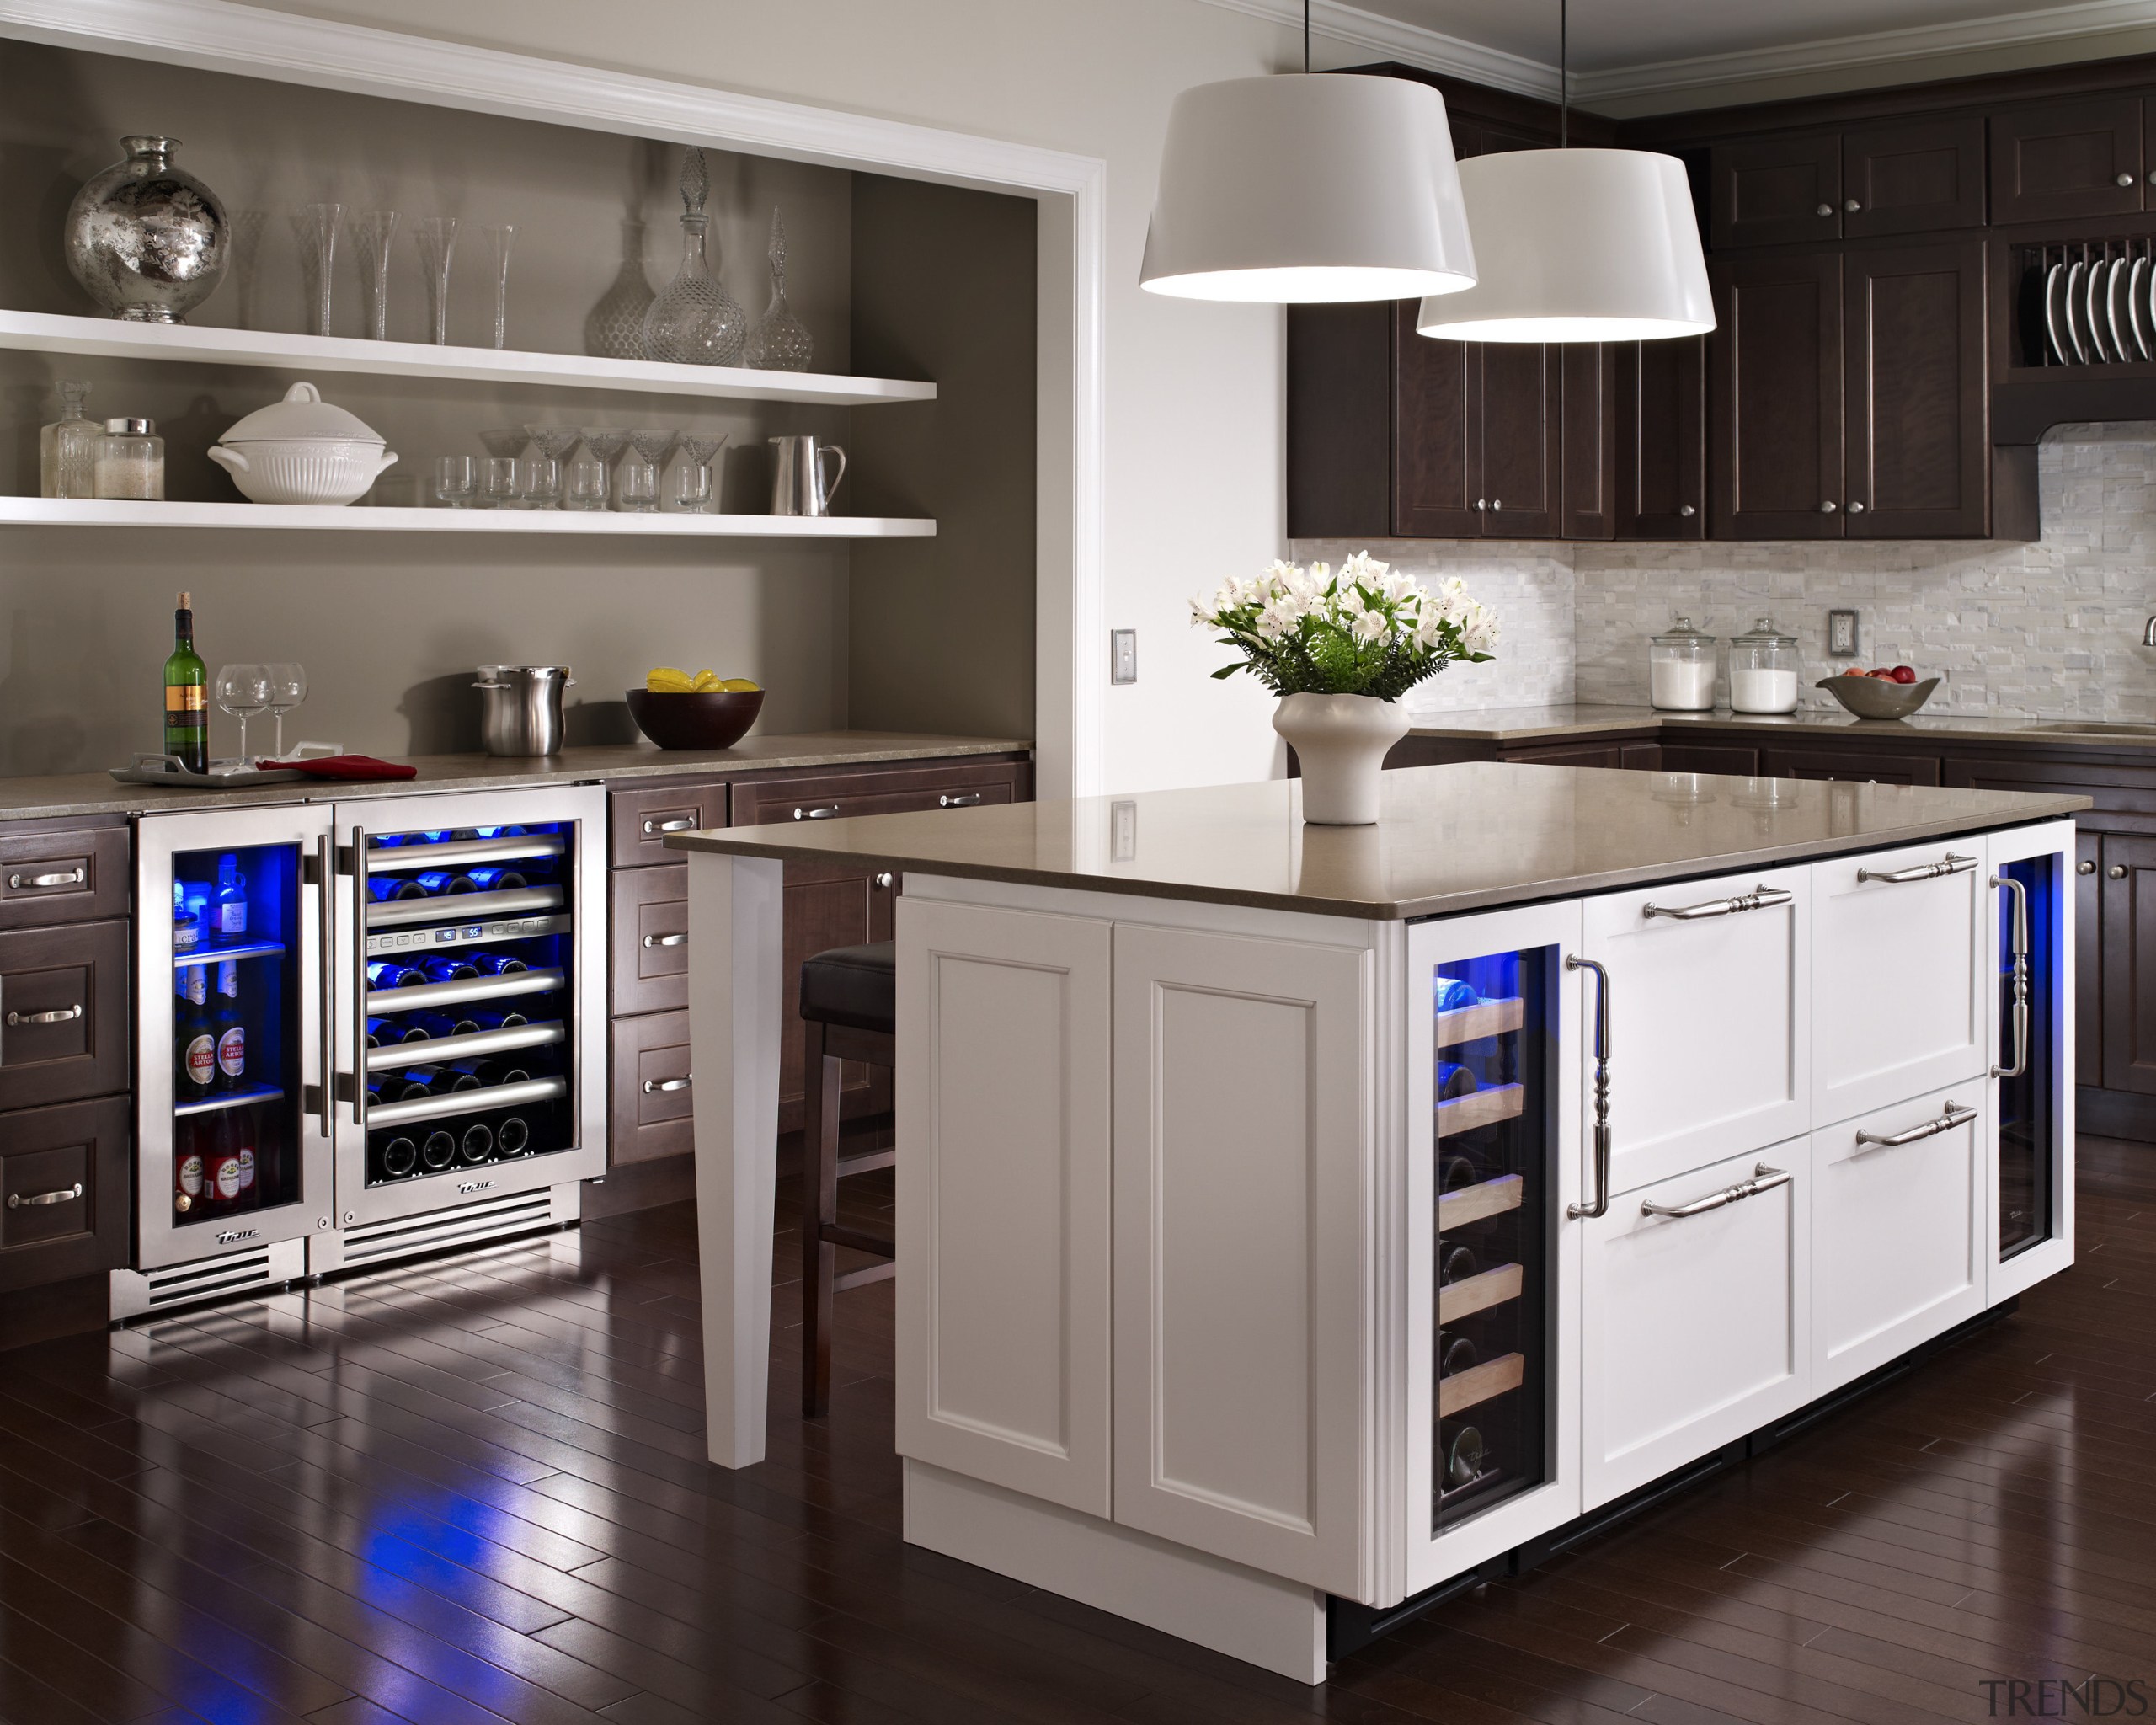 Wine refrigerator from the True Professional Series, a cabinetry, countertop, cuisine classique, home appliance, interior design, kitchen, kitchen appliance, kitchen stove, major appliance, microwave oven, oven, refrigerator, room, small appliance, gray, black